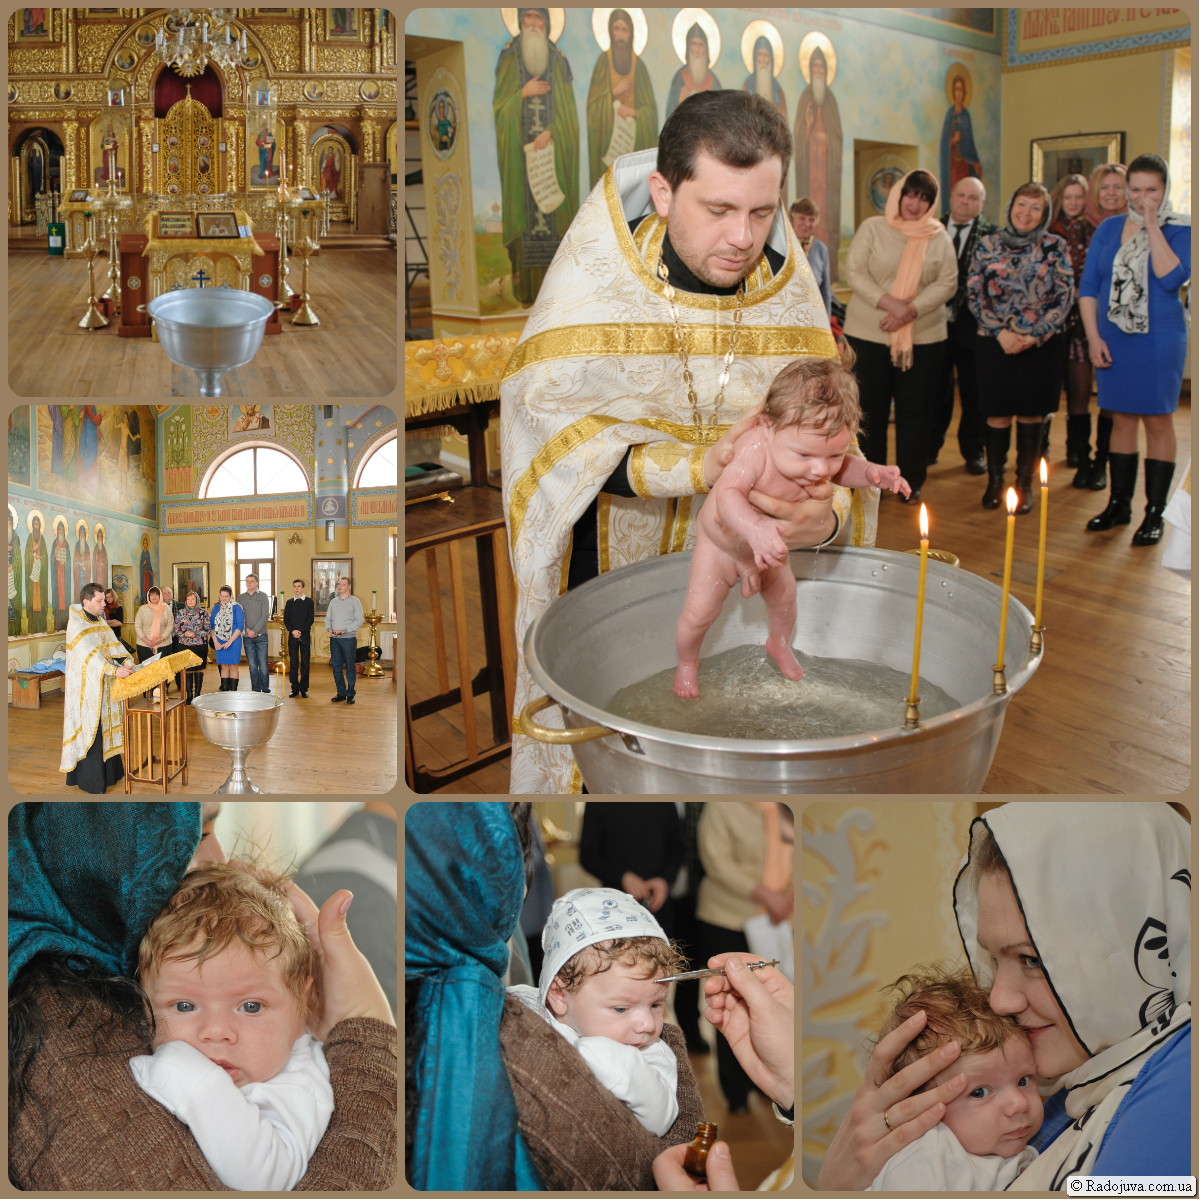 Photos from the baptism of a child